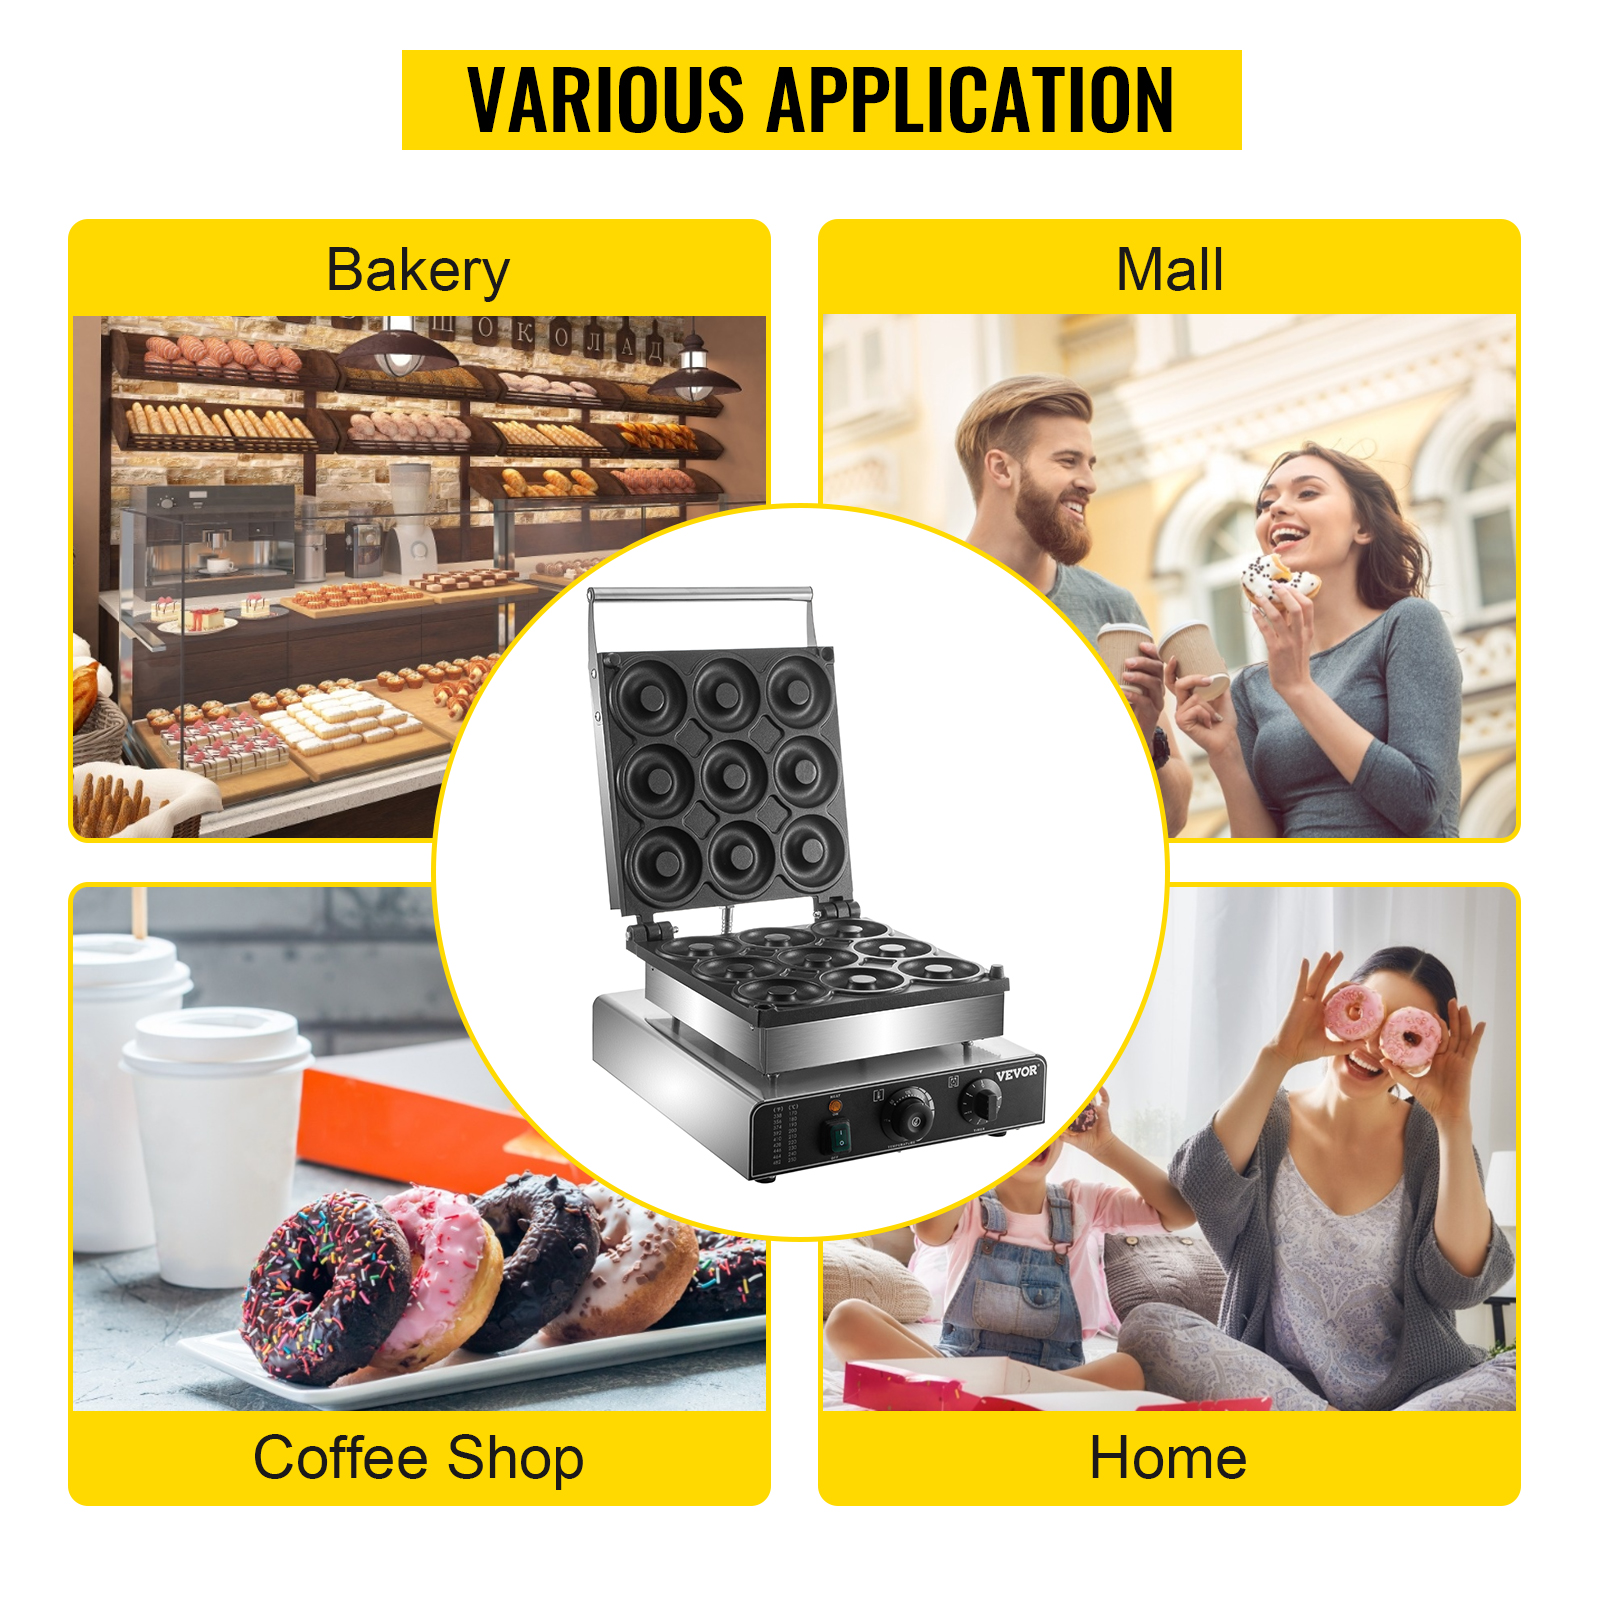 Mini Donut Maker, 1400w Donut Maker Machine, Can Make 16 Donuts, Heated on  Both Sides, Non-stick Pan, Suitable for Family Gatherings, Dessert Making